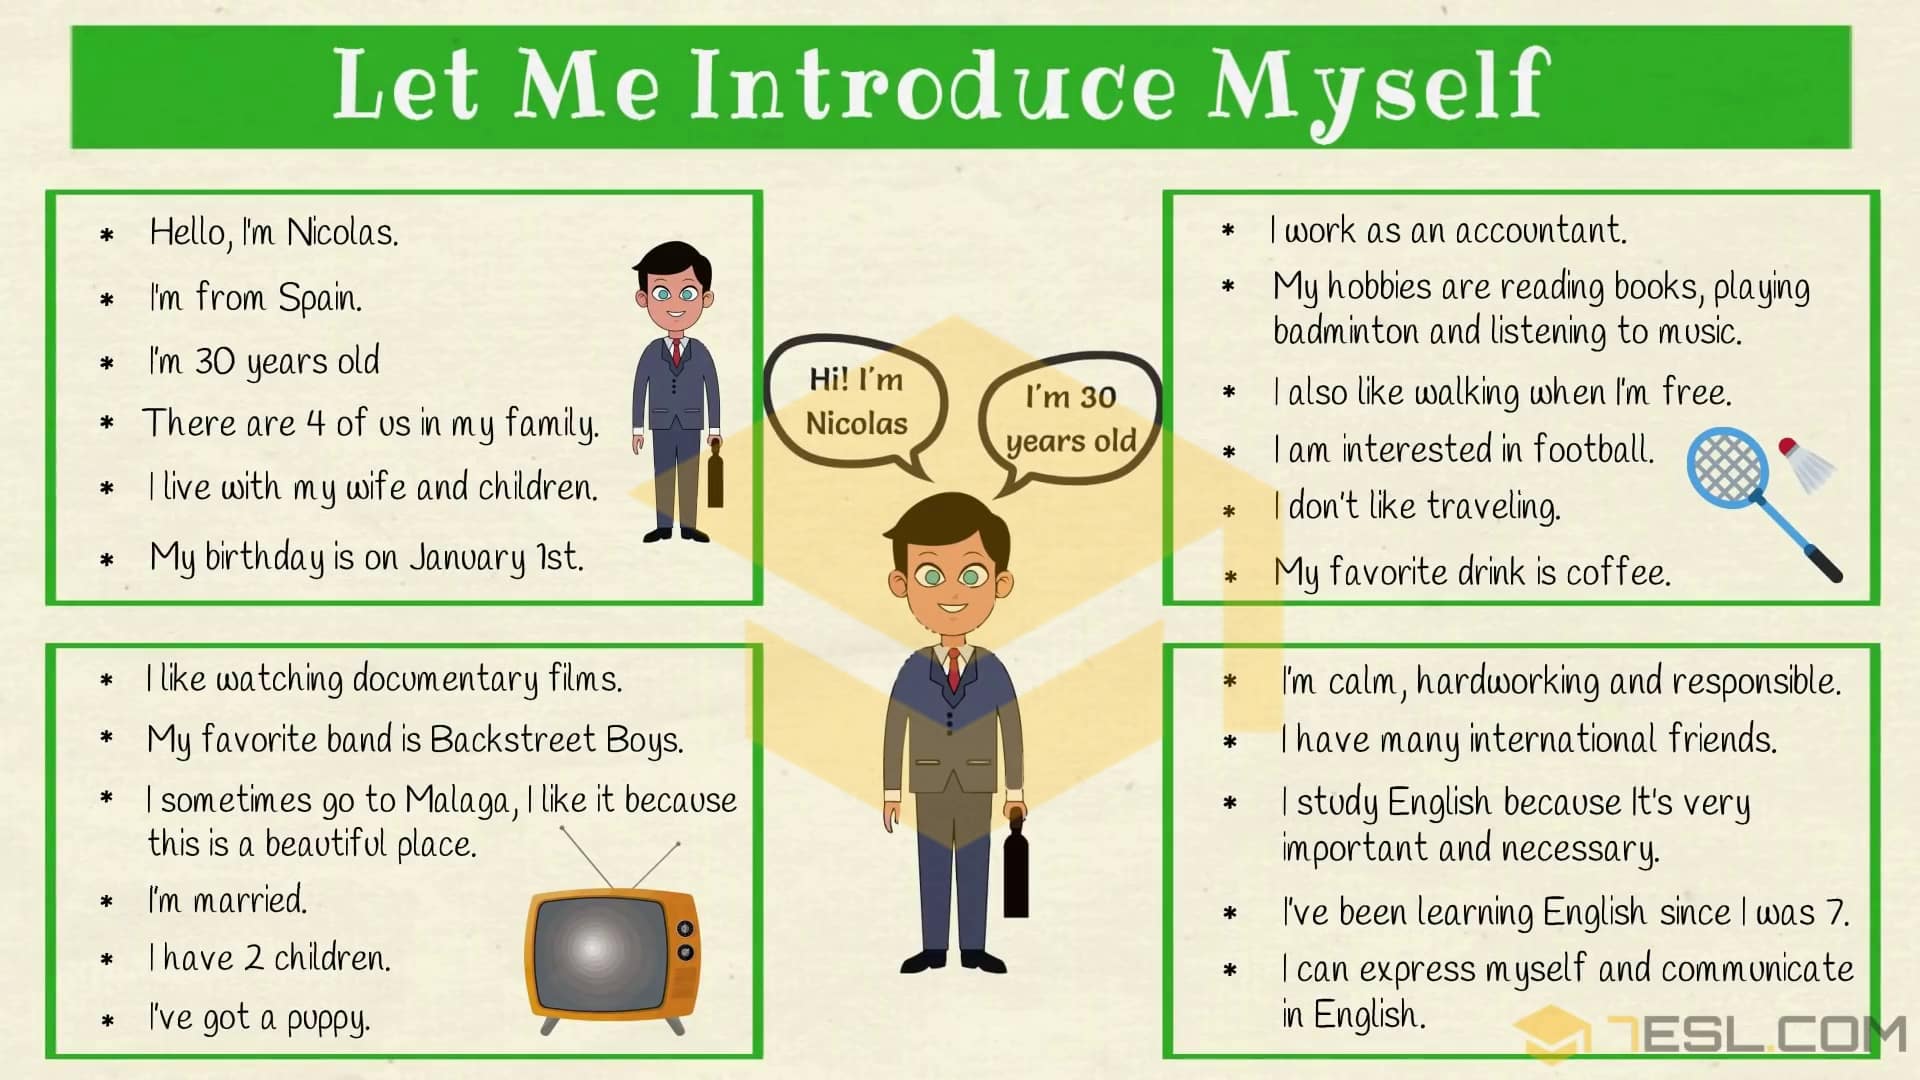 How to Introduce Yourself Confidently! Self-Introduction Tips & Samples • 7ESL